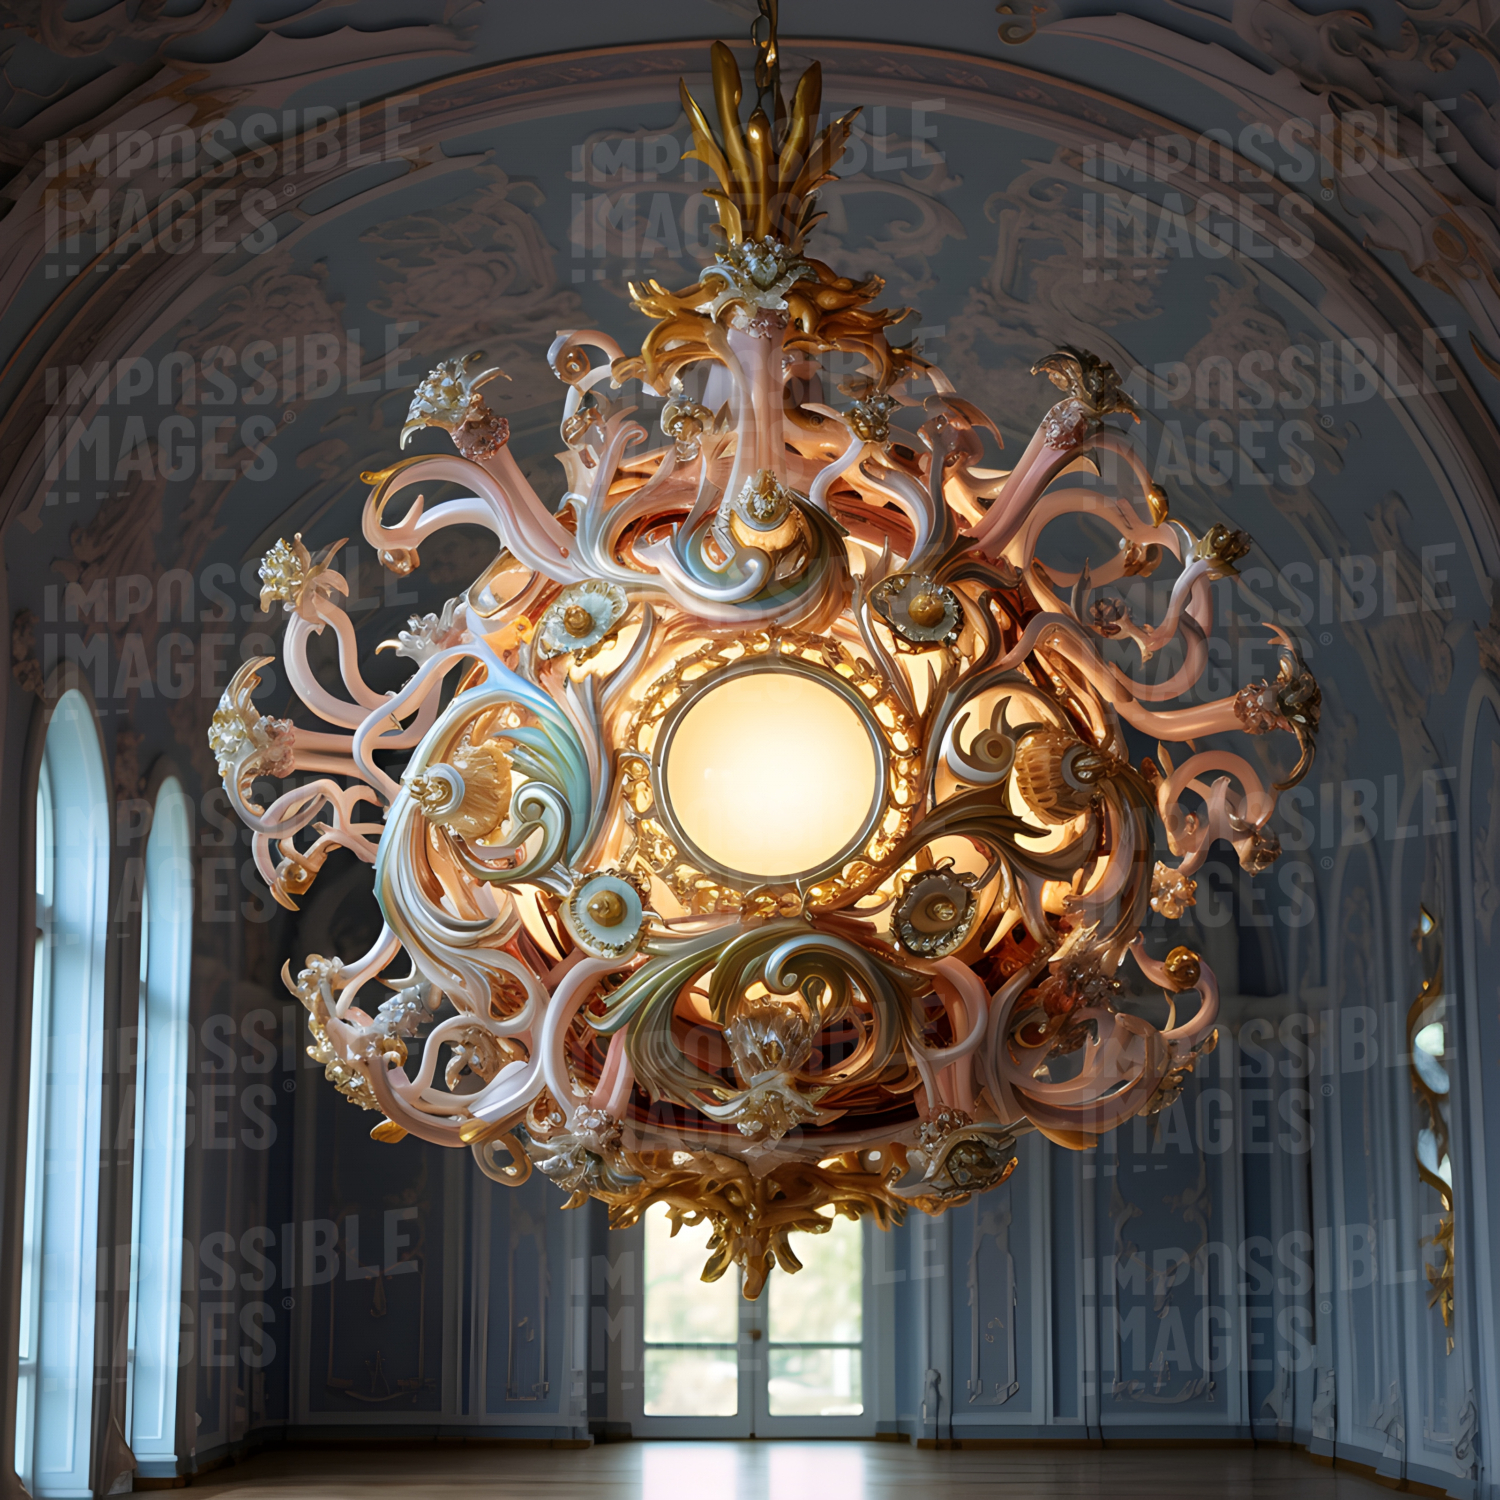 Huge bizarrely ornate organic looking chandelier hanging in the halway of a stately home